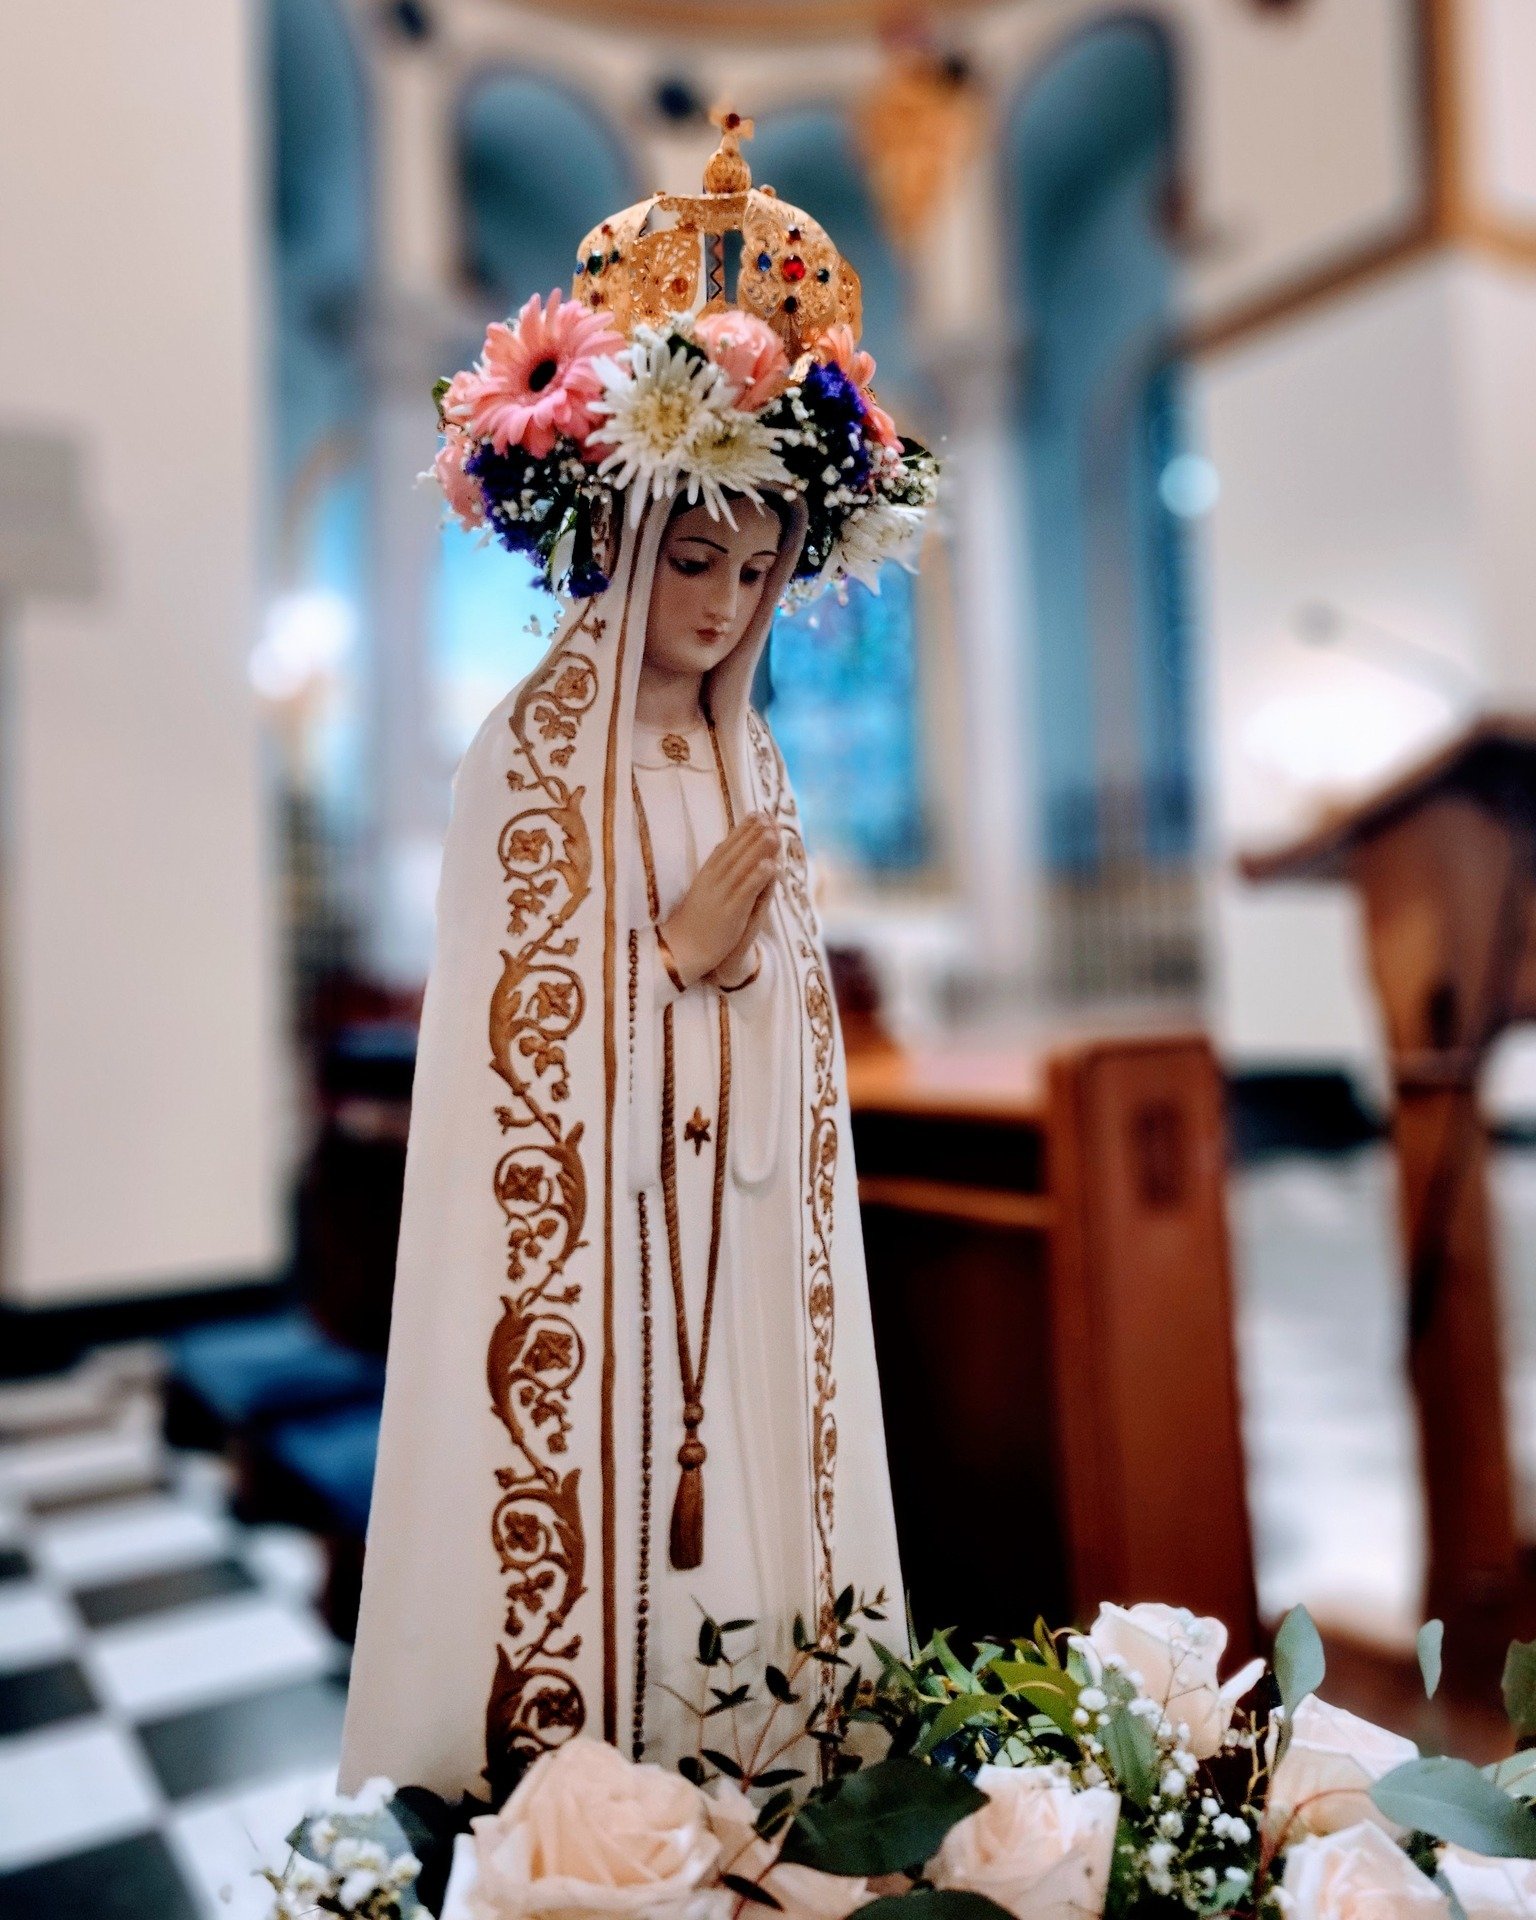 A belated Happy Mother's Day! 
Here at SMR we celebrated in style, crowning the Blessed Mother, consecration to Jesus through Mary, carnations, and fellowship. We are so grateful for the special feminine touch only a mother can provide. And especiall